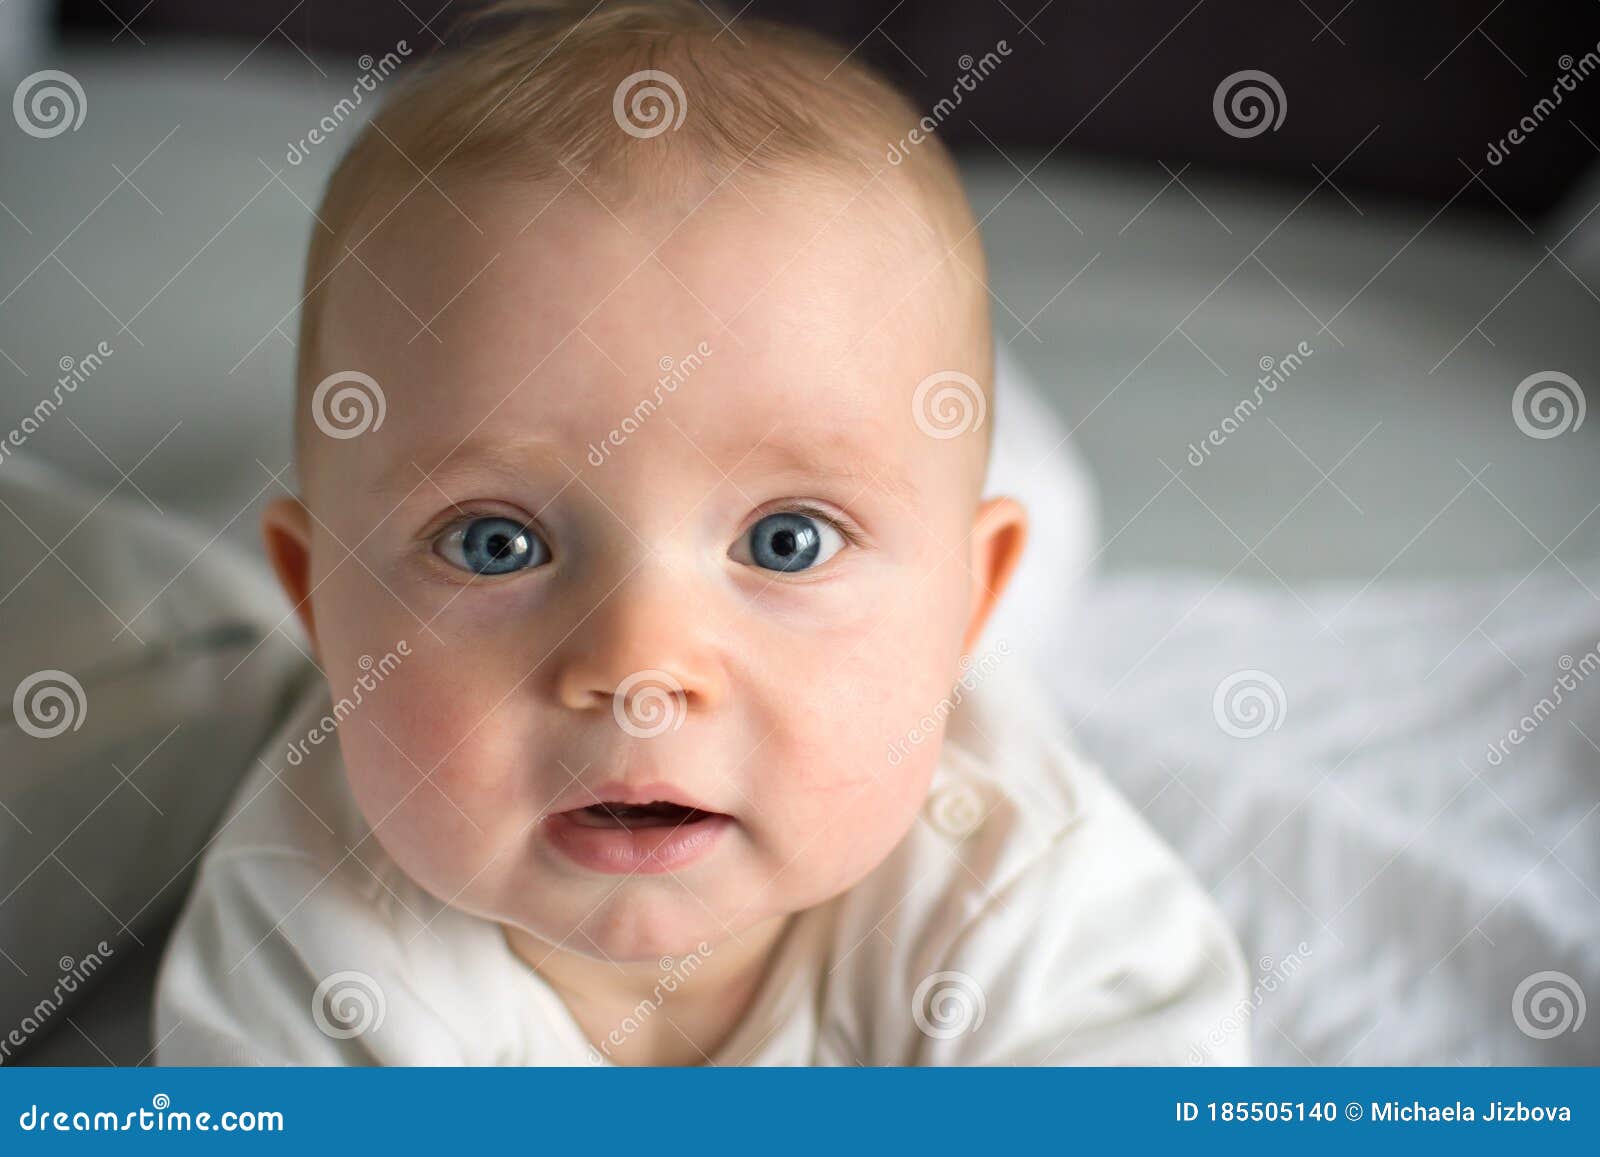 Little Baby Boy Half Year Old Laying and Smiling Stock Photo - Image of ...